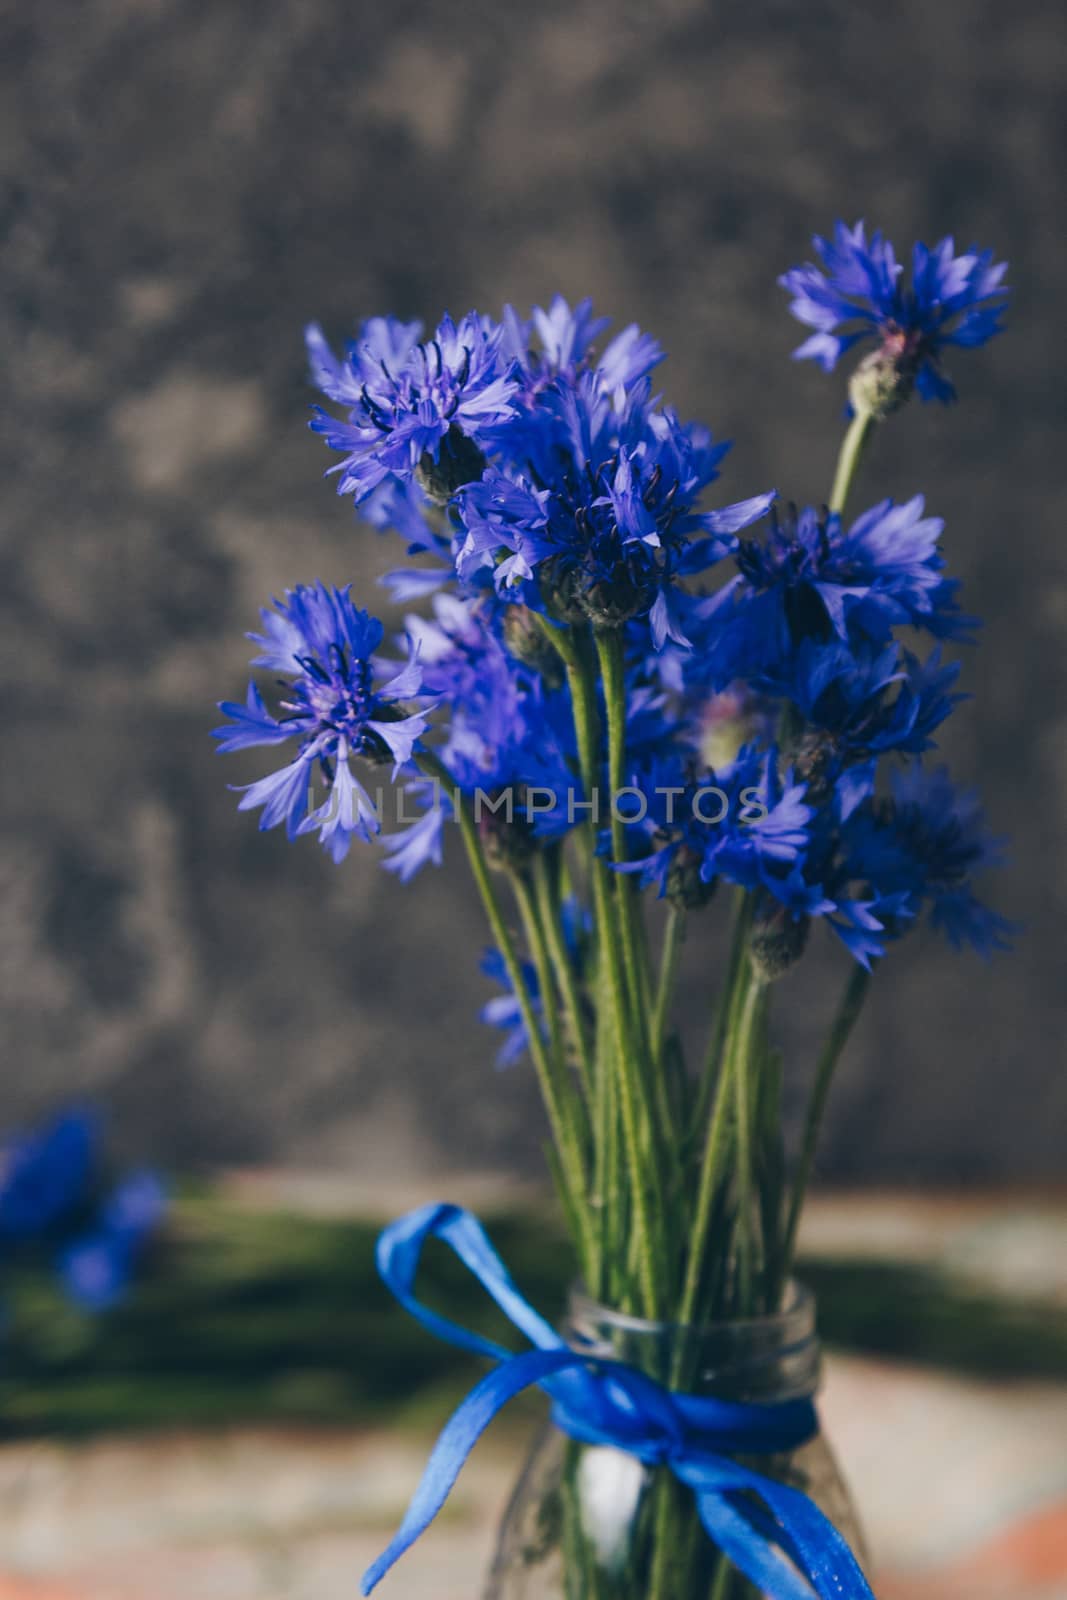 Seasonal summer flowers blue cornflowers and fruits strawberries on a napkin close-up conceptual background by yulaphotographer